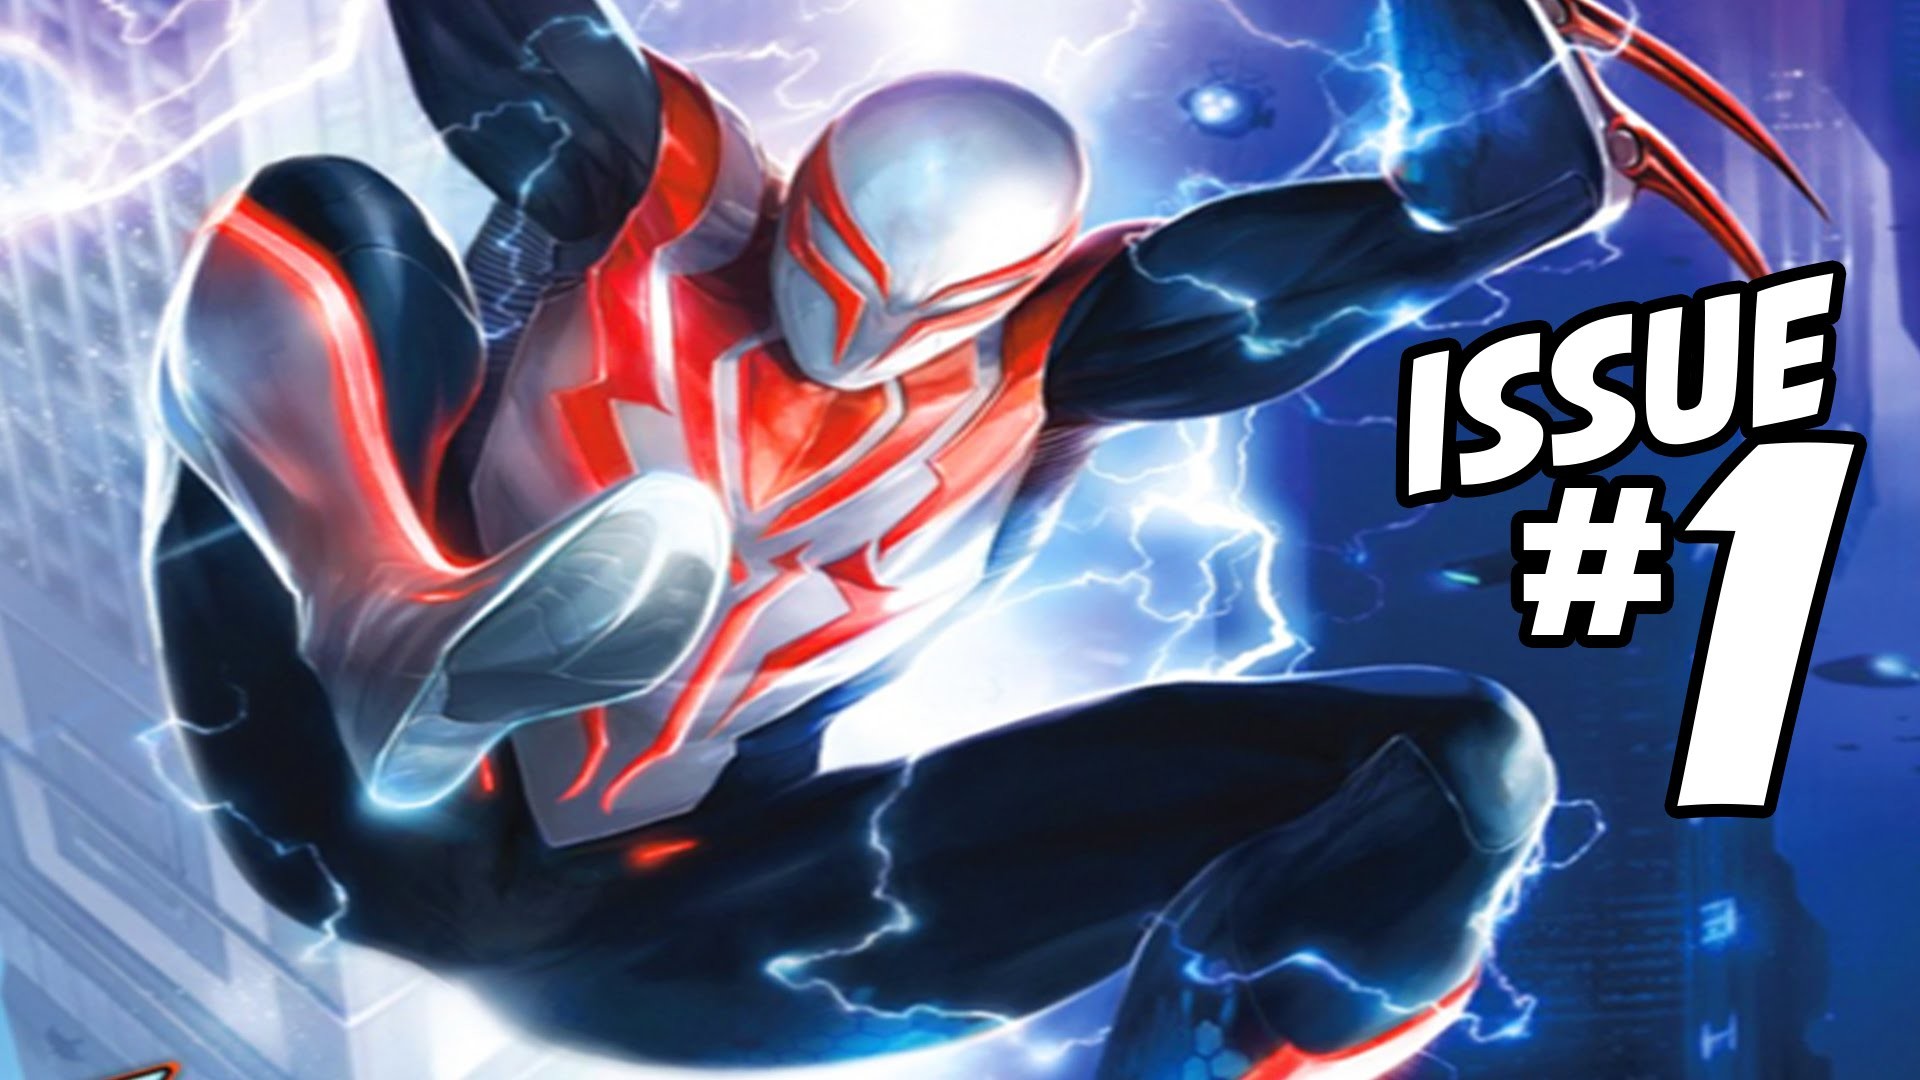 Spider-Man 2099 (All-New All-Different) Issue #1 Full Comic Review! (2015)  – YouTube